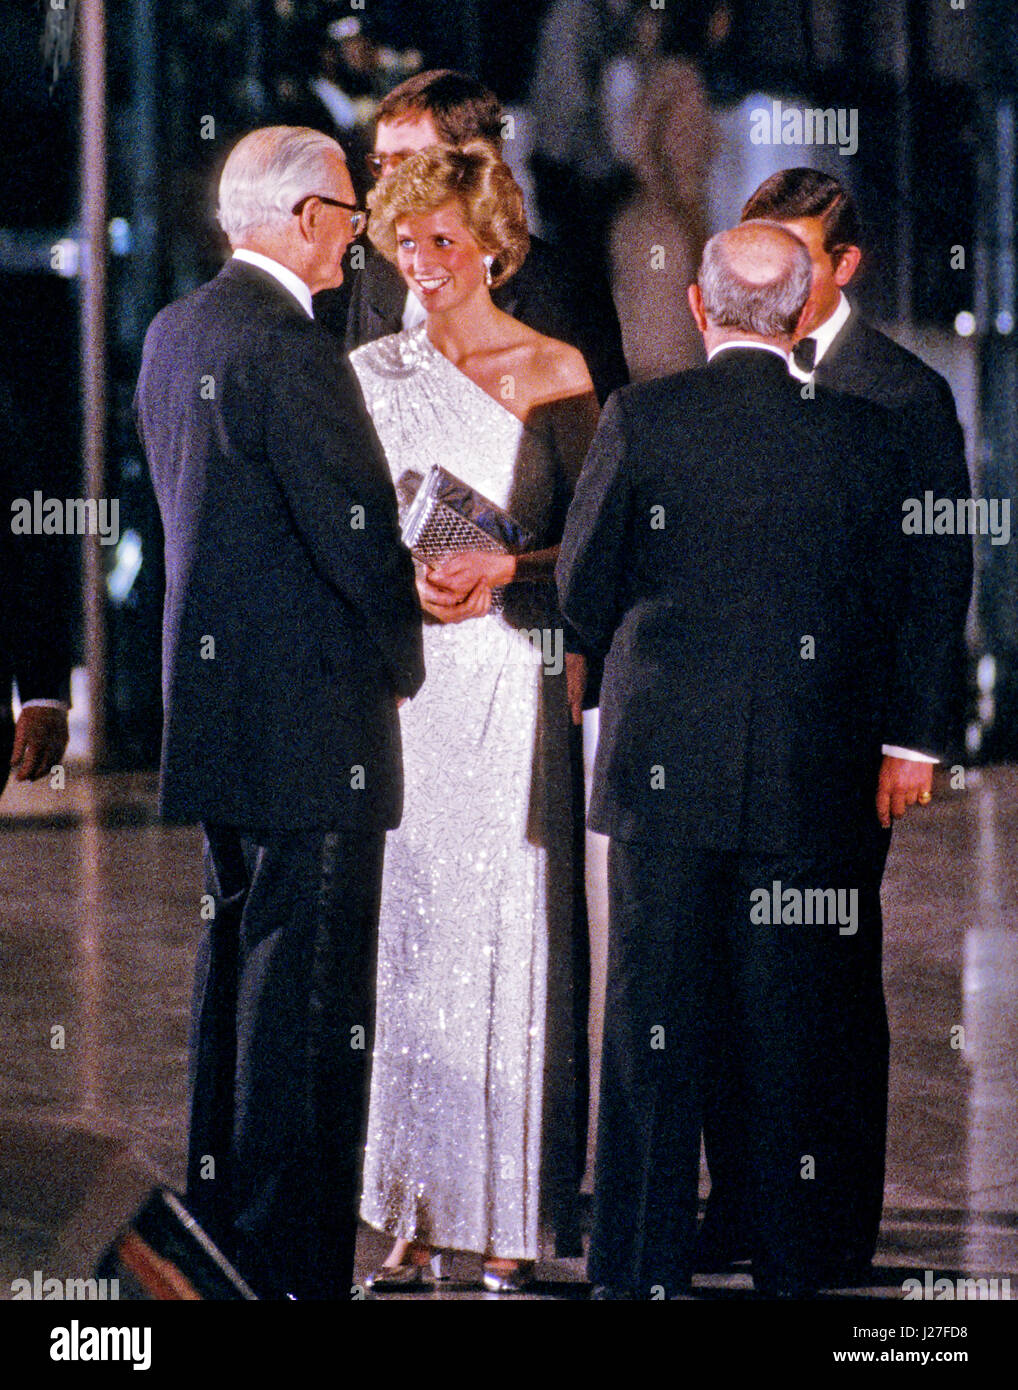 Princess Diana departs the National Gallery of Art in Washington, DC following an evening dinner and reception accompanied by Dr. Franklin Murphy, Board Chairman of the National Gallery of Art, and John Stevenson, President of the National Gallery of Art, in Washington, DC on November 11, 1985. Credit: Howard L. Sachs/CNP - NO WIRE SERVICE- Photo: Howard L. Sachs/Consolidated News Photos/Howard L. Sachs - CNP Stock Photo